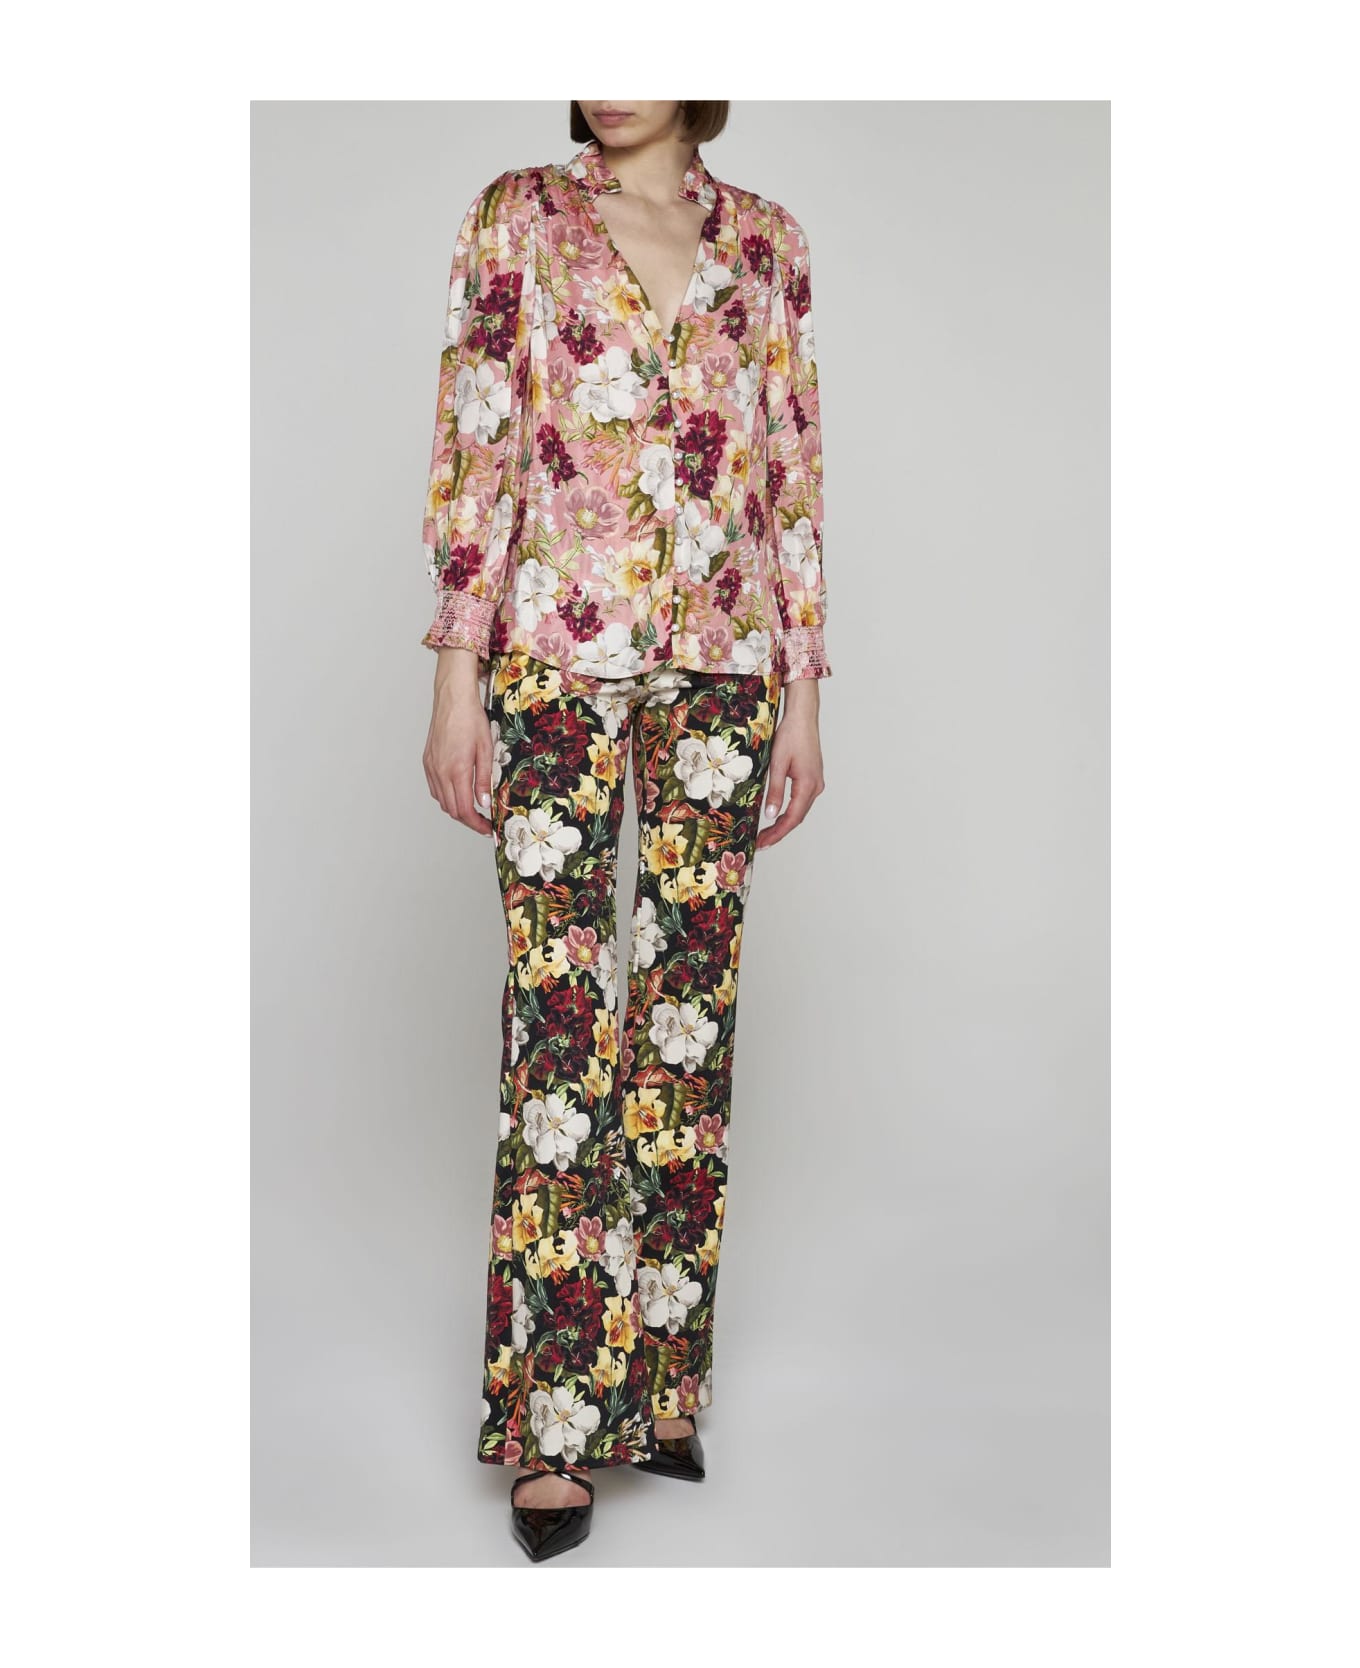 Alice + Olivia Reilly Floral Print Viscose Blouse - Floral Rose ブラウス